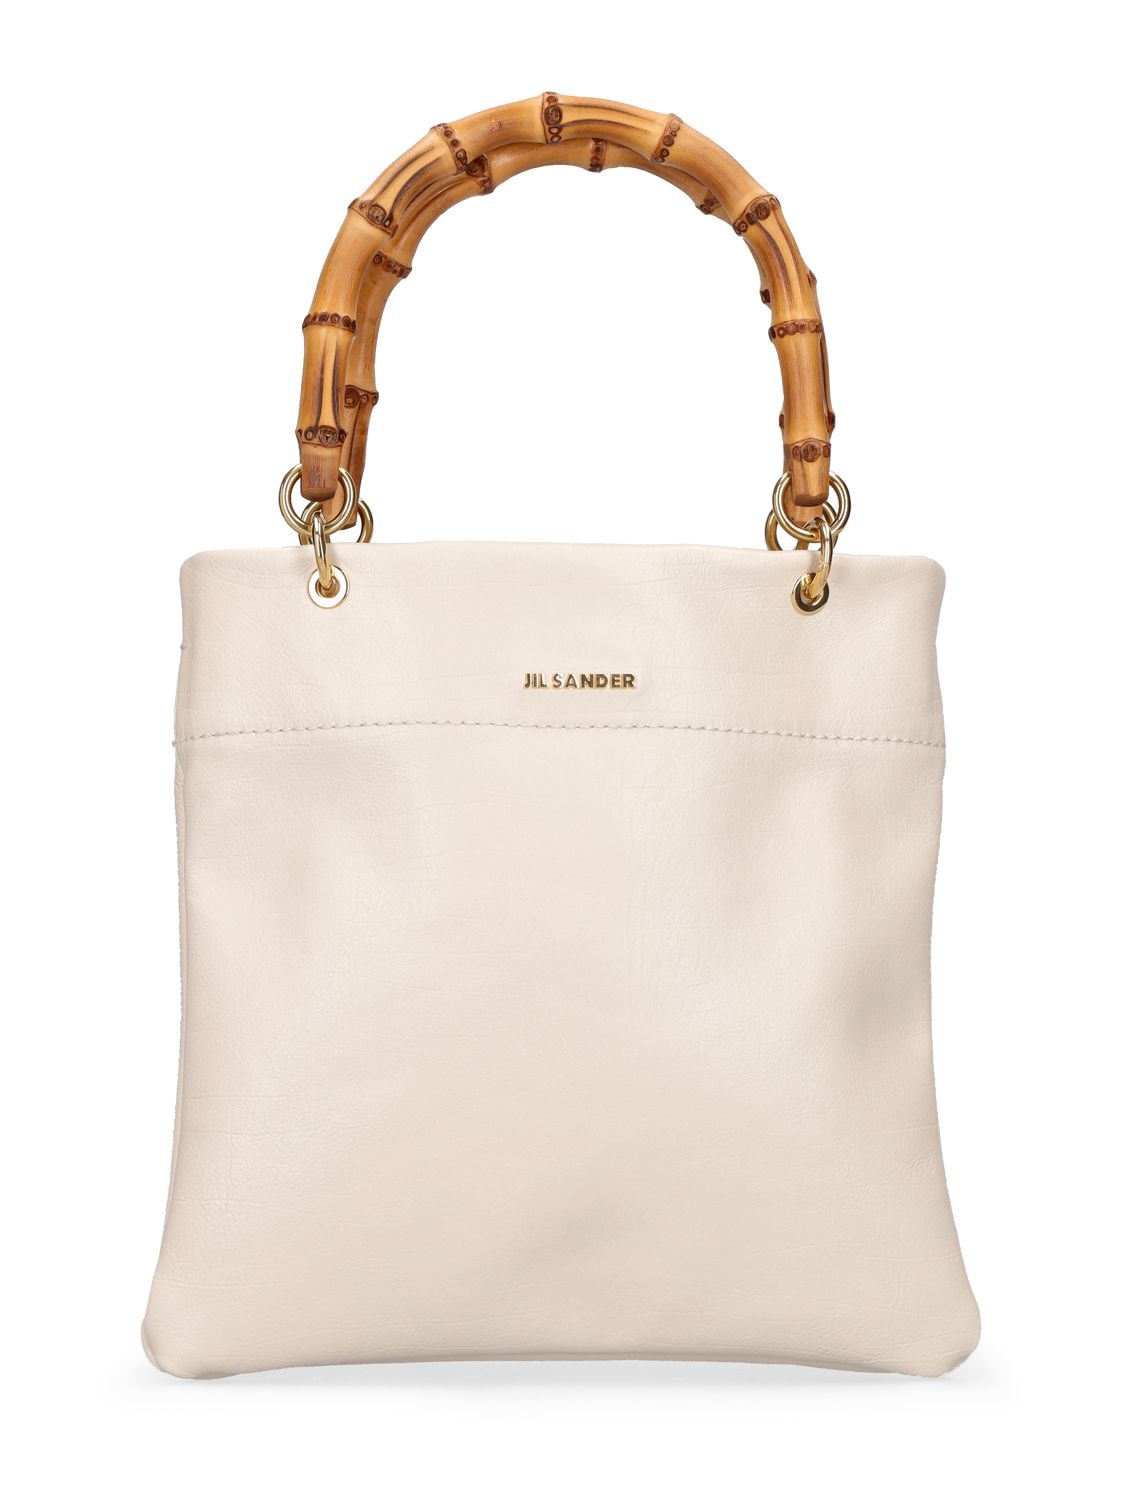 Jil Sander Small Smooth Leather Tote Bag In Chalk